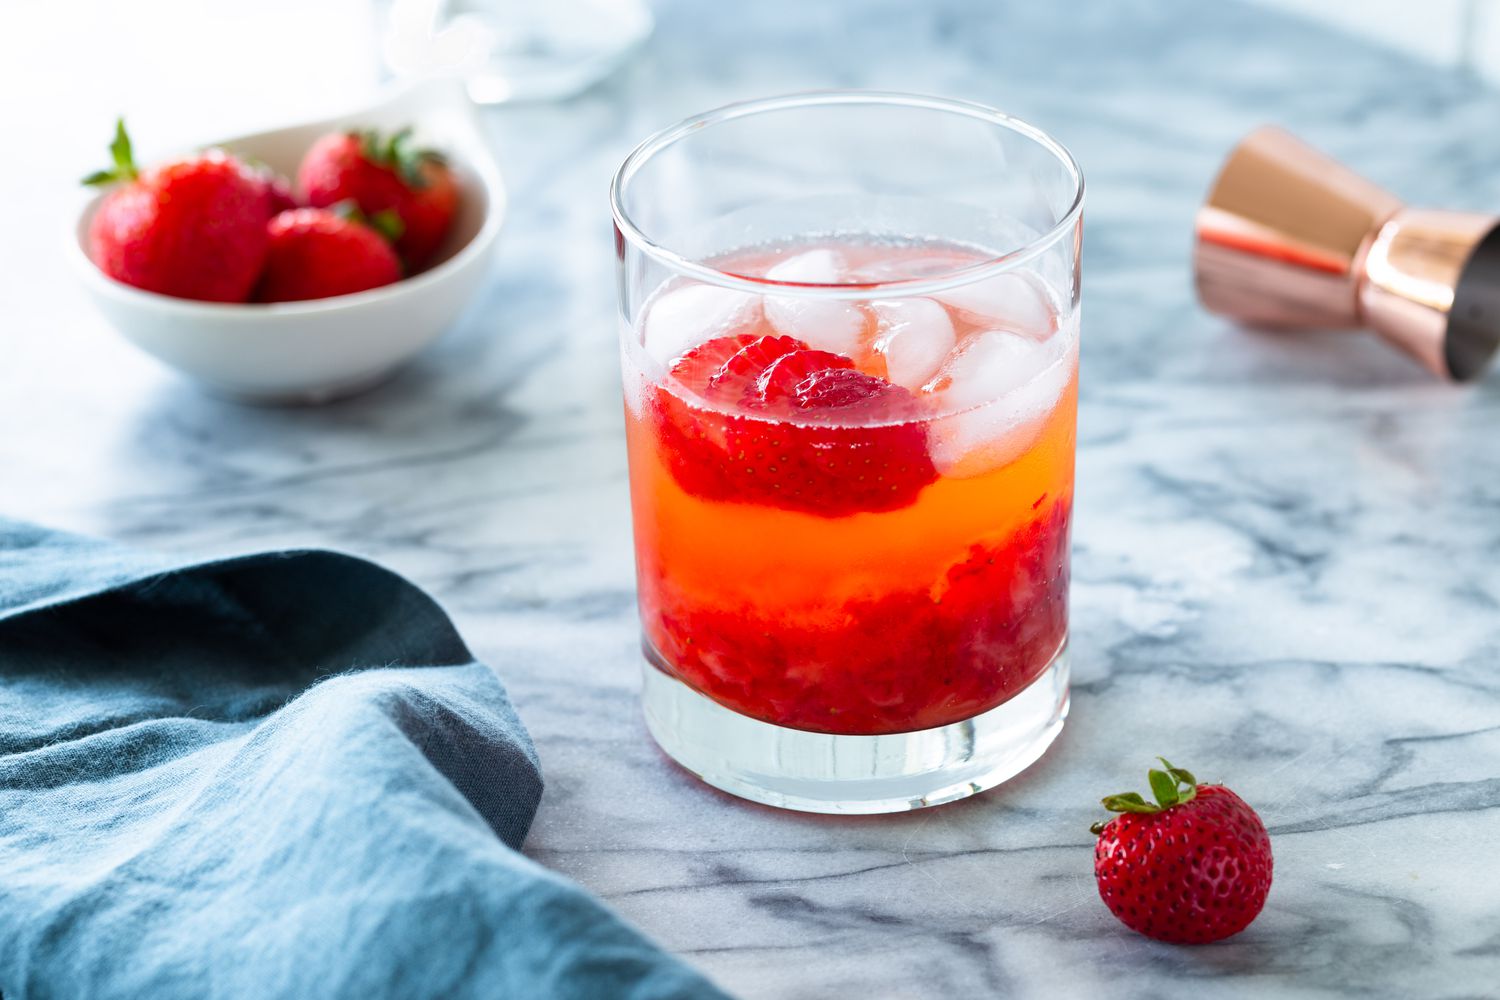 Satisfy Your Cravings with These Fruit Cocktail Recipes